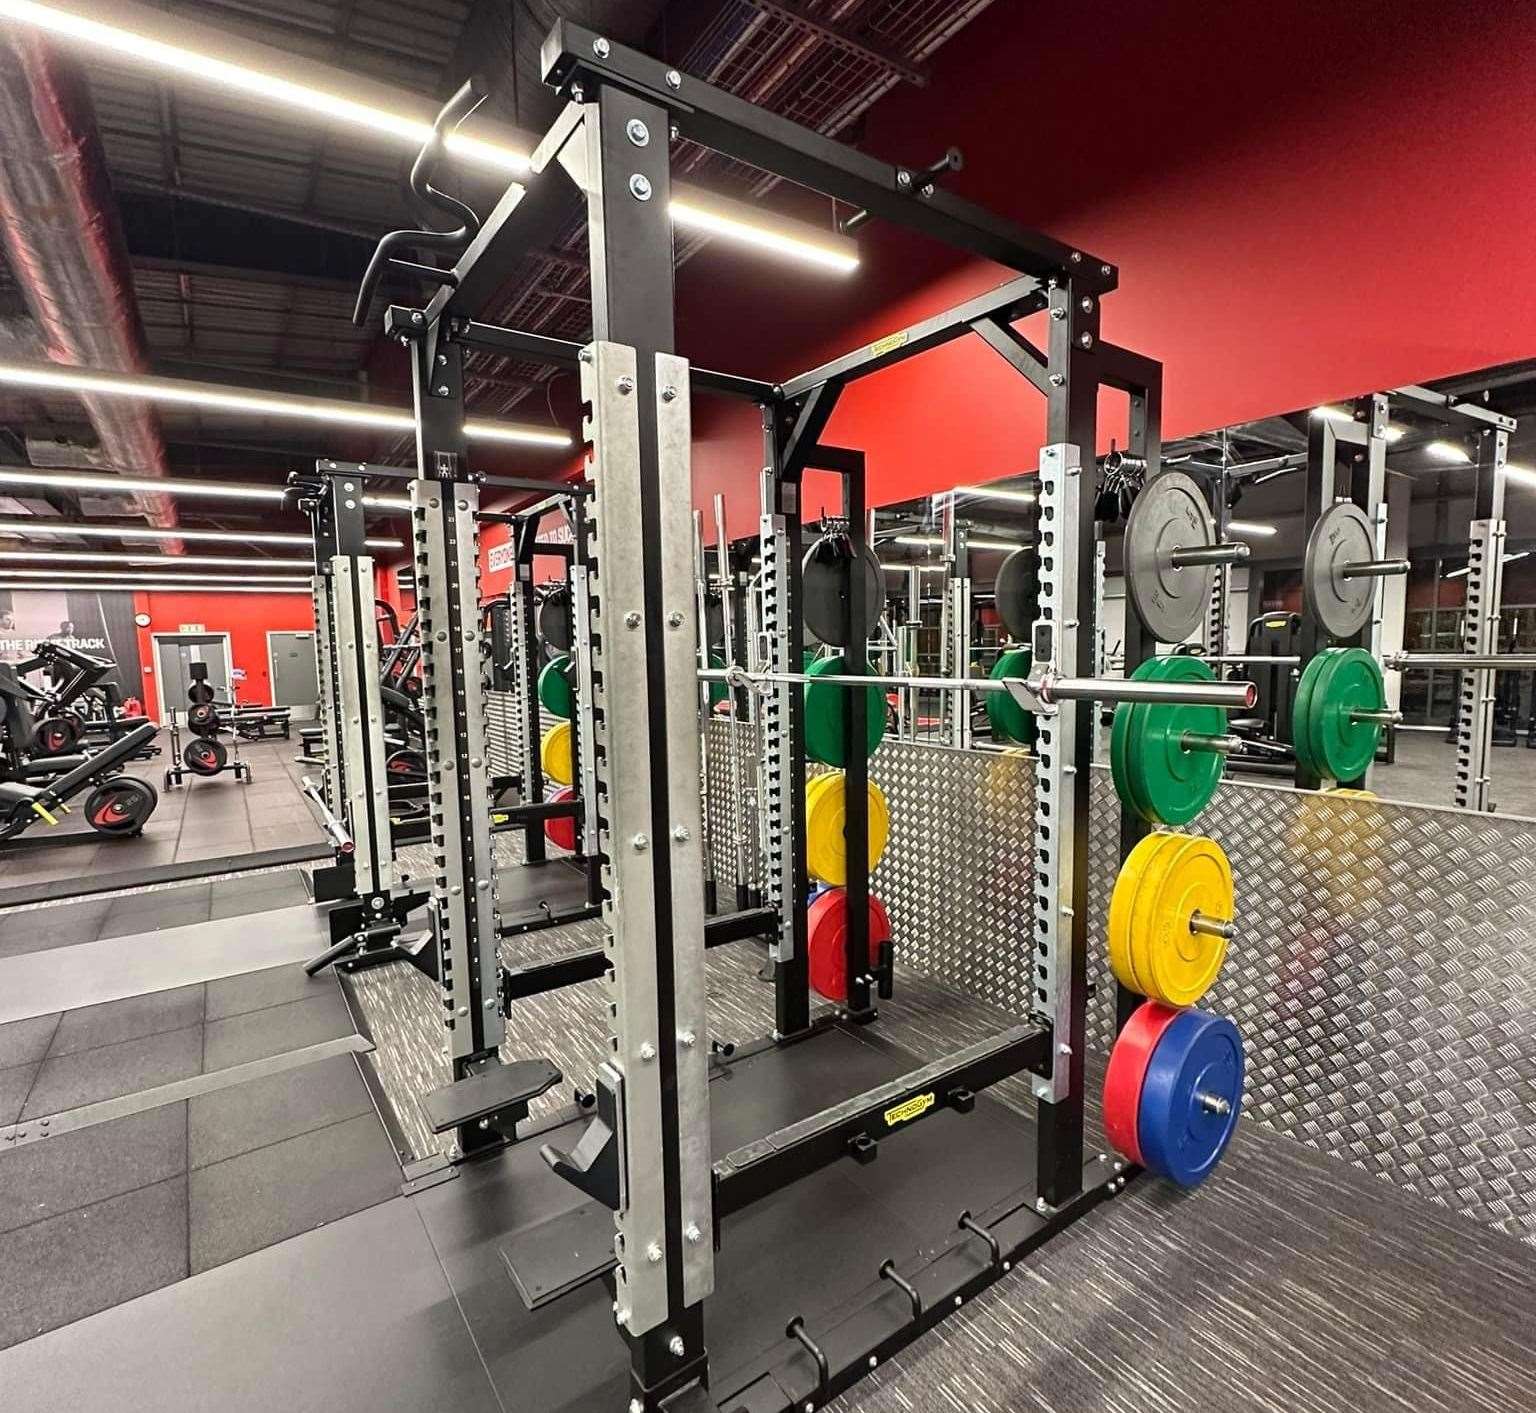 The facilities at the gym will be getting an upgrade. Picture: Sevenoaks District Council